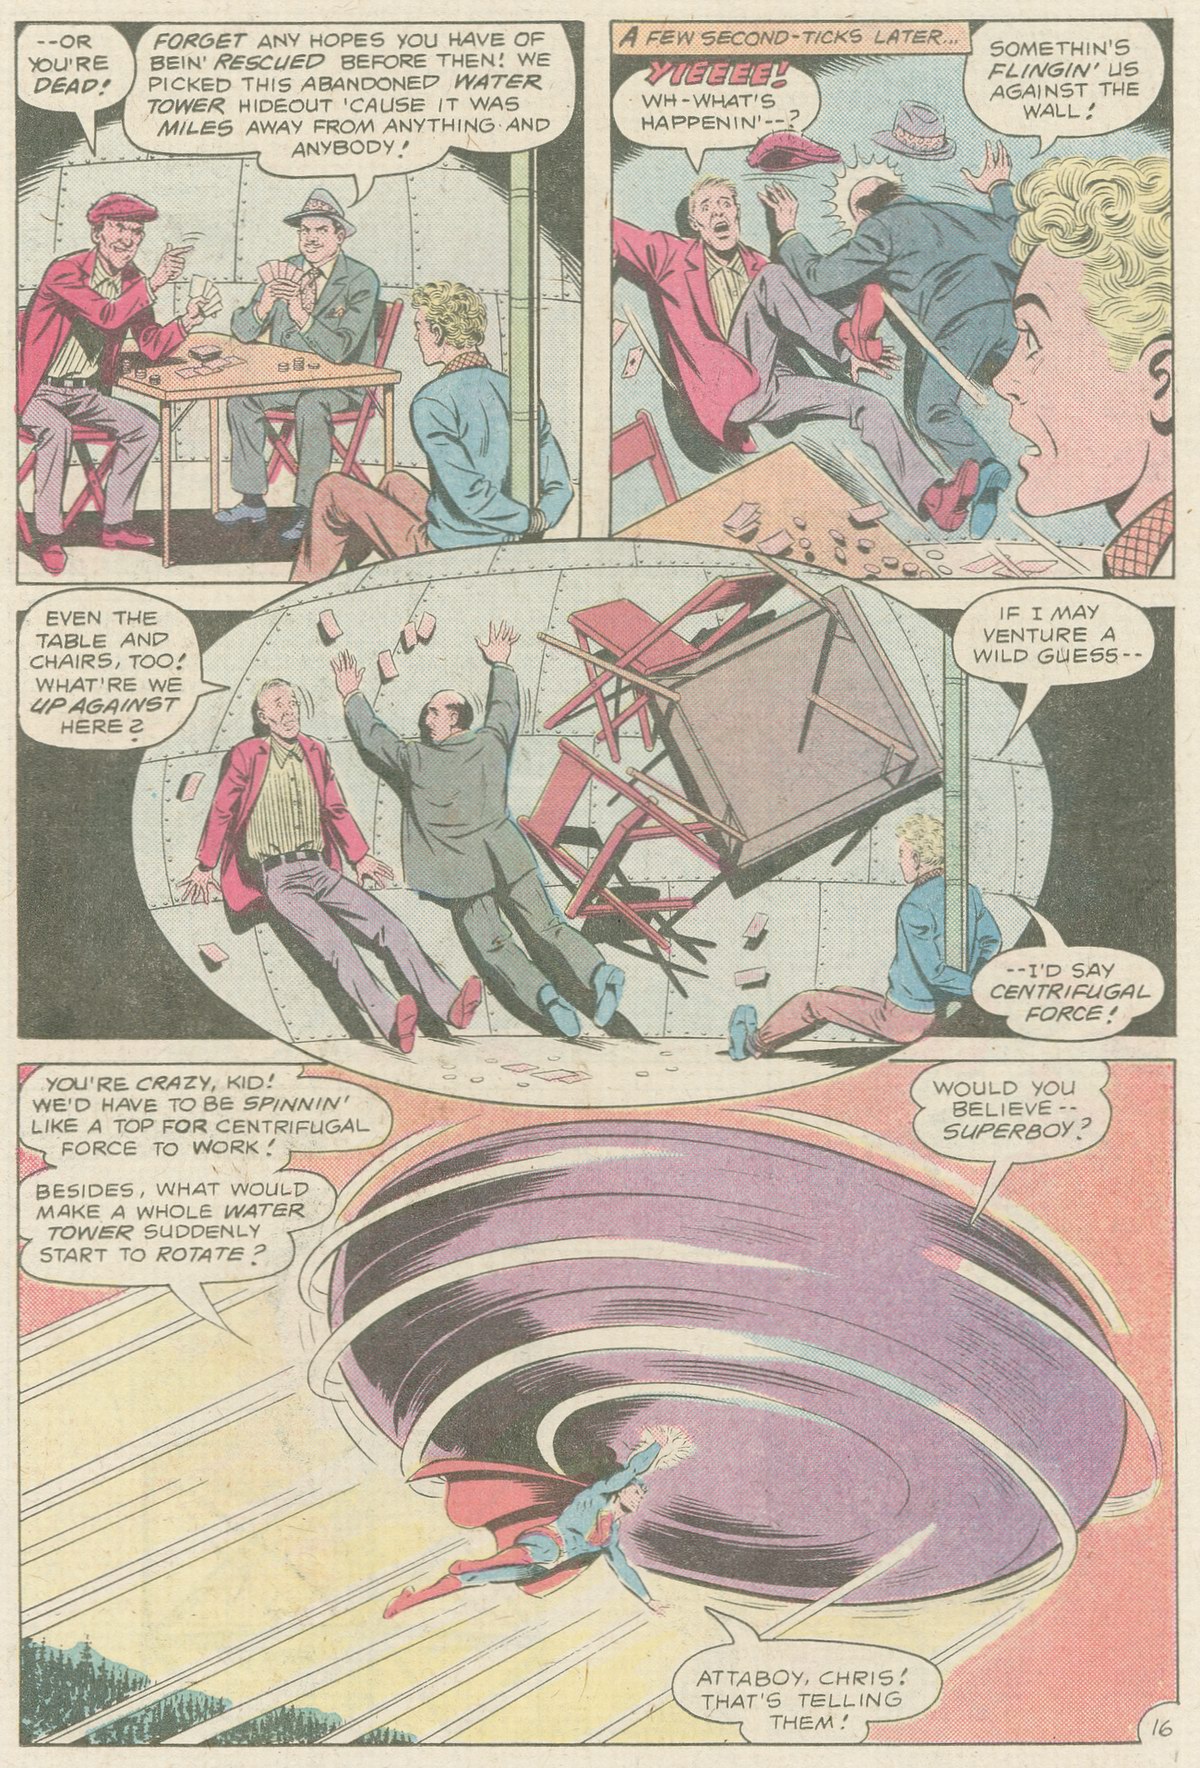 The New Adventures of Superboy 16 Page 16